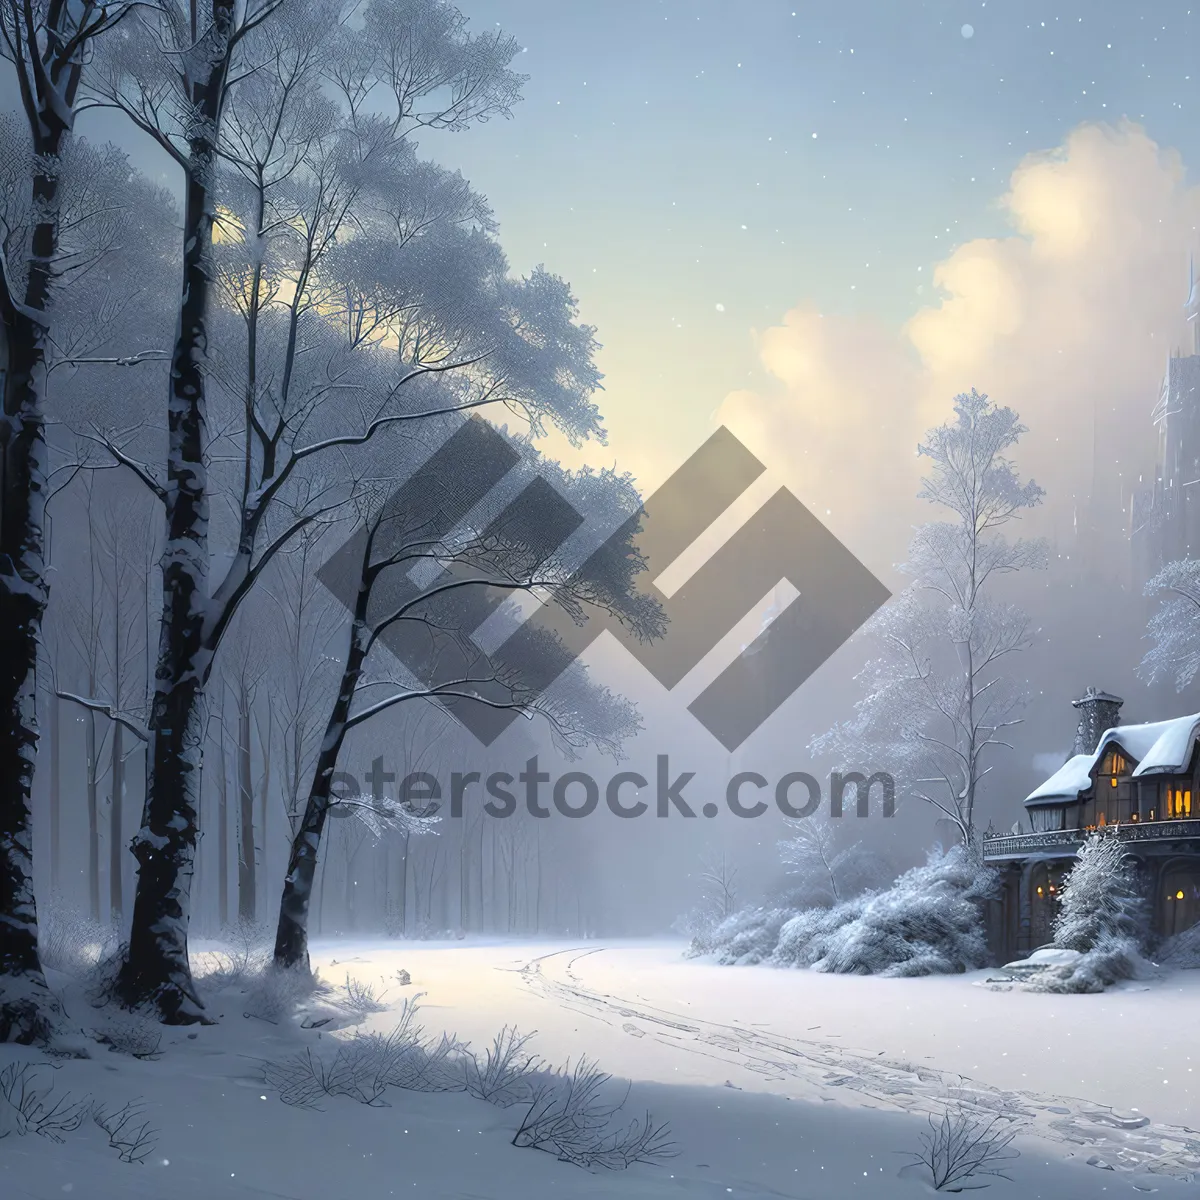 Picture of Winter Wonderland: Snow-covered Forest Scene with Snowplow